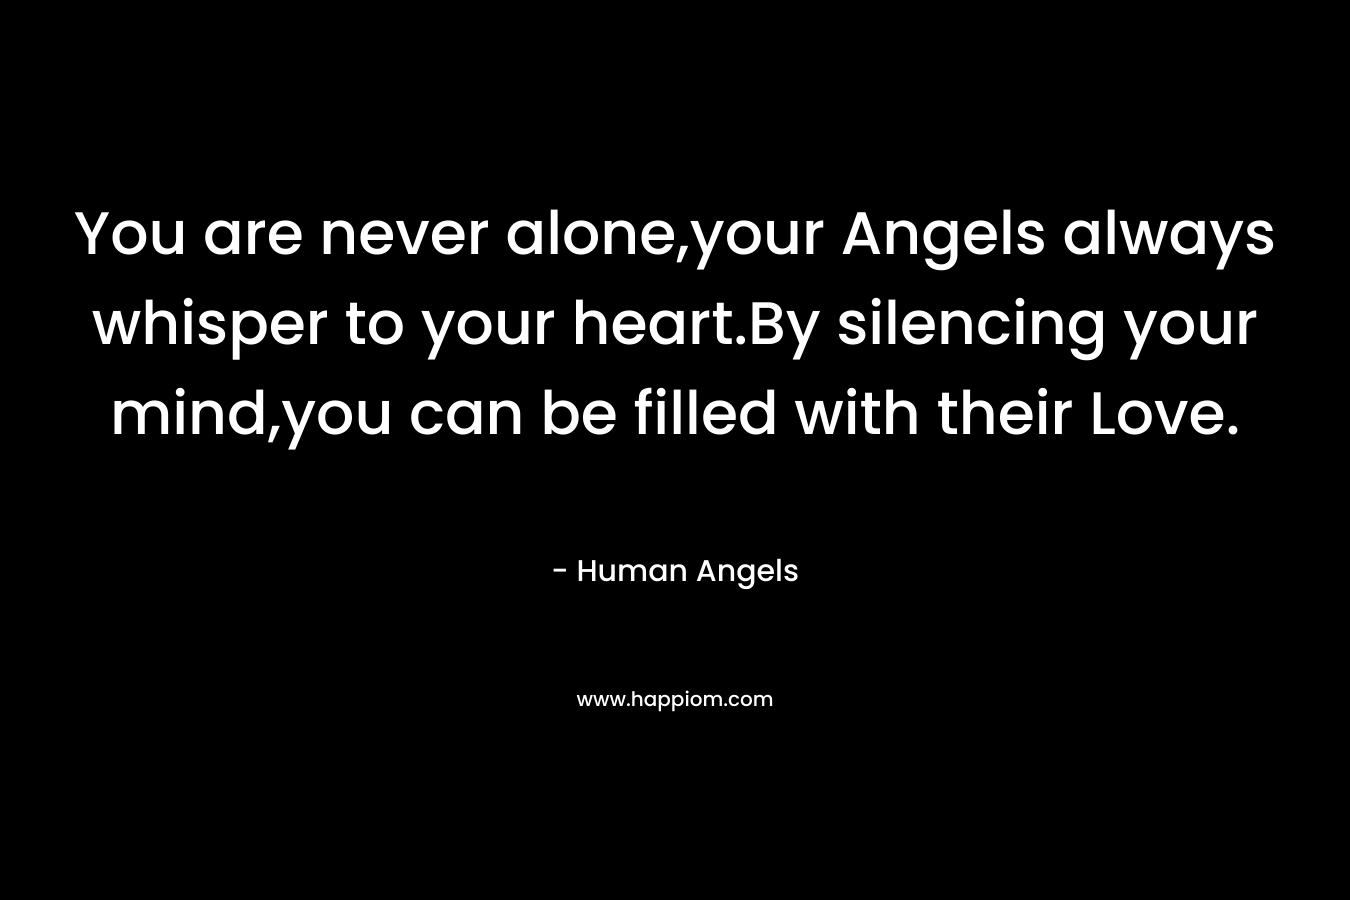 You are never alone,your Angels always whisper to your heart.By silencing your mind,you can be filled with their Love.